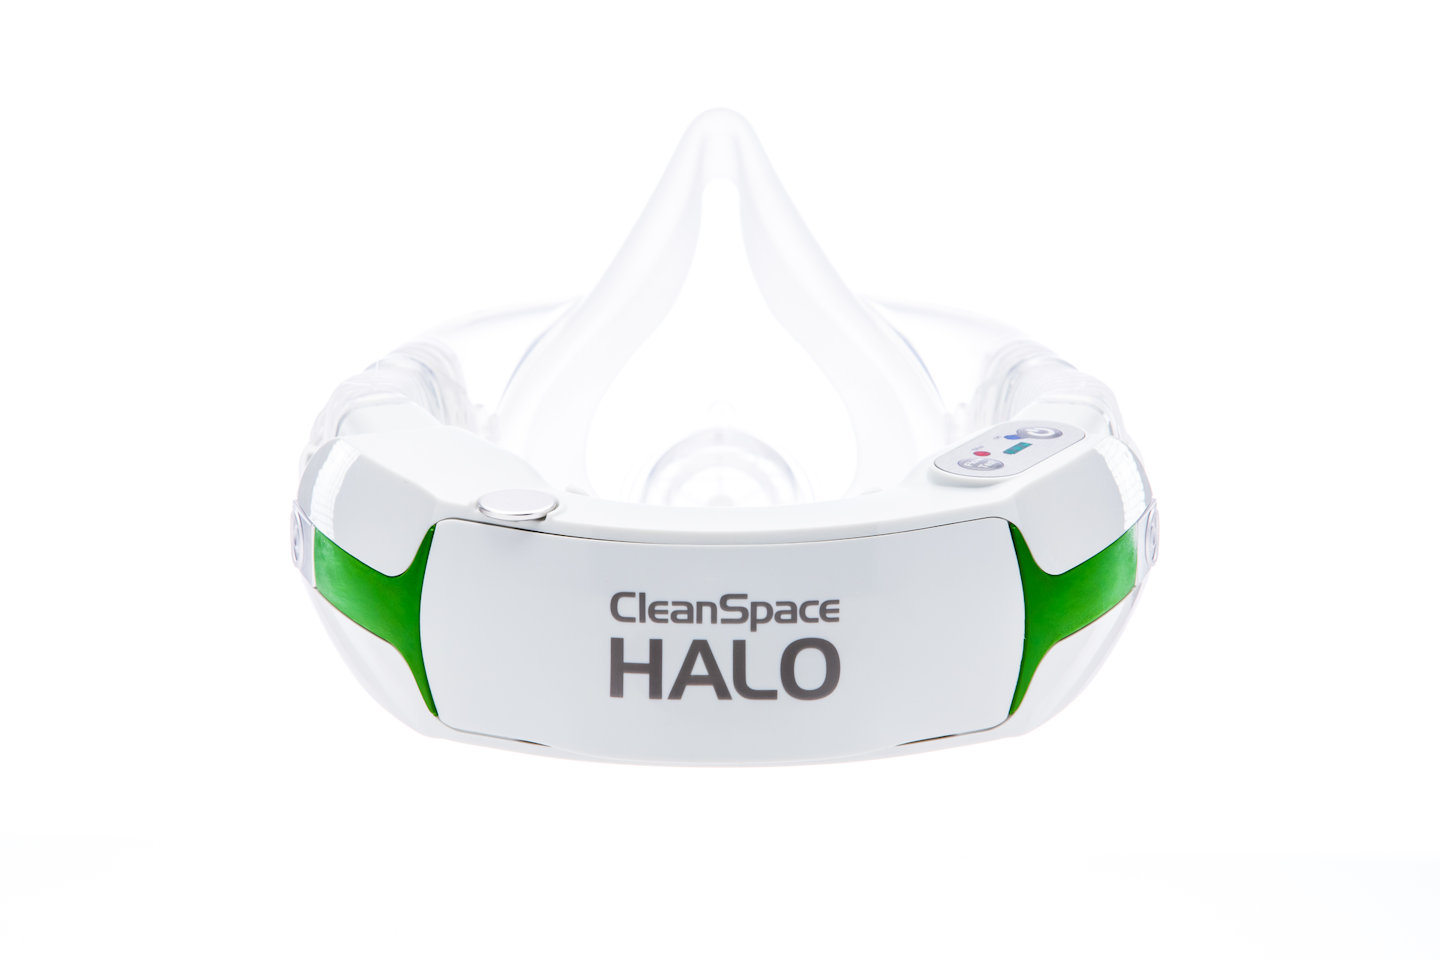  CleanSpace  introduces HALO  respirator Healthcare 